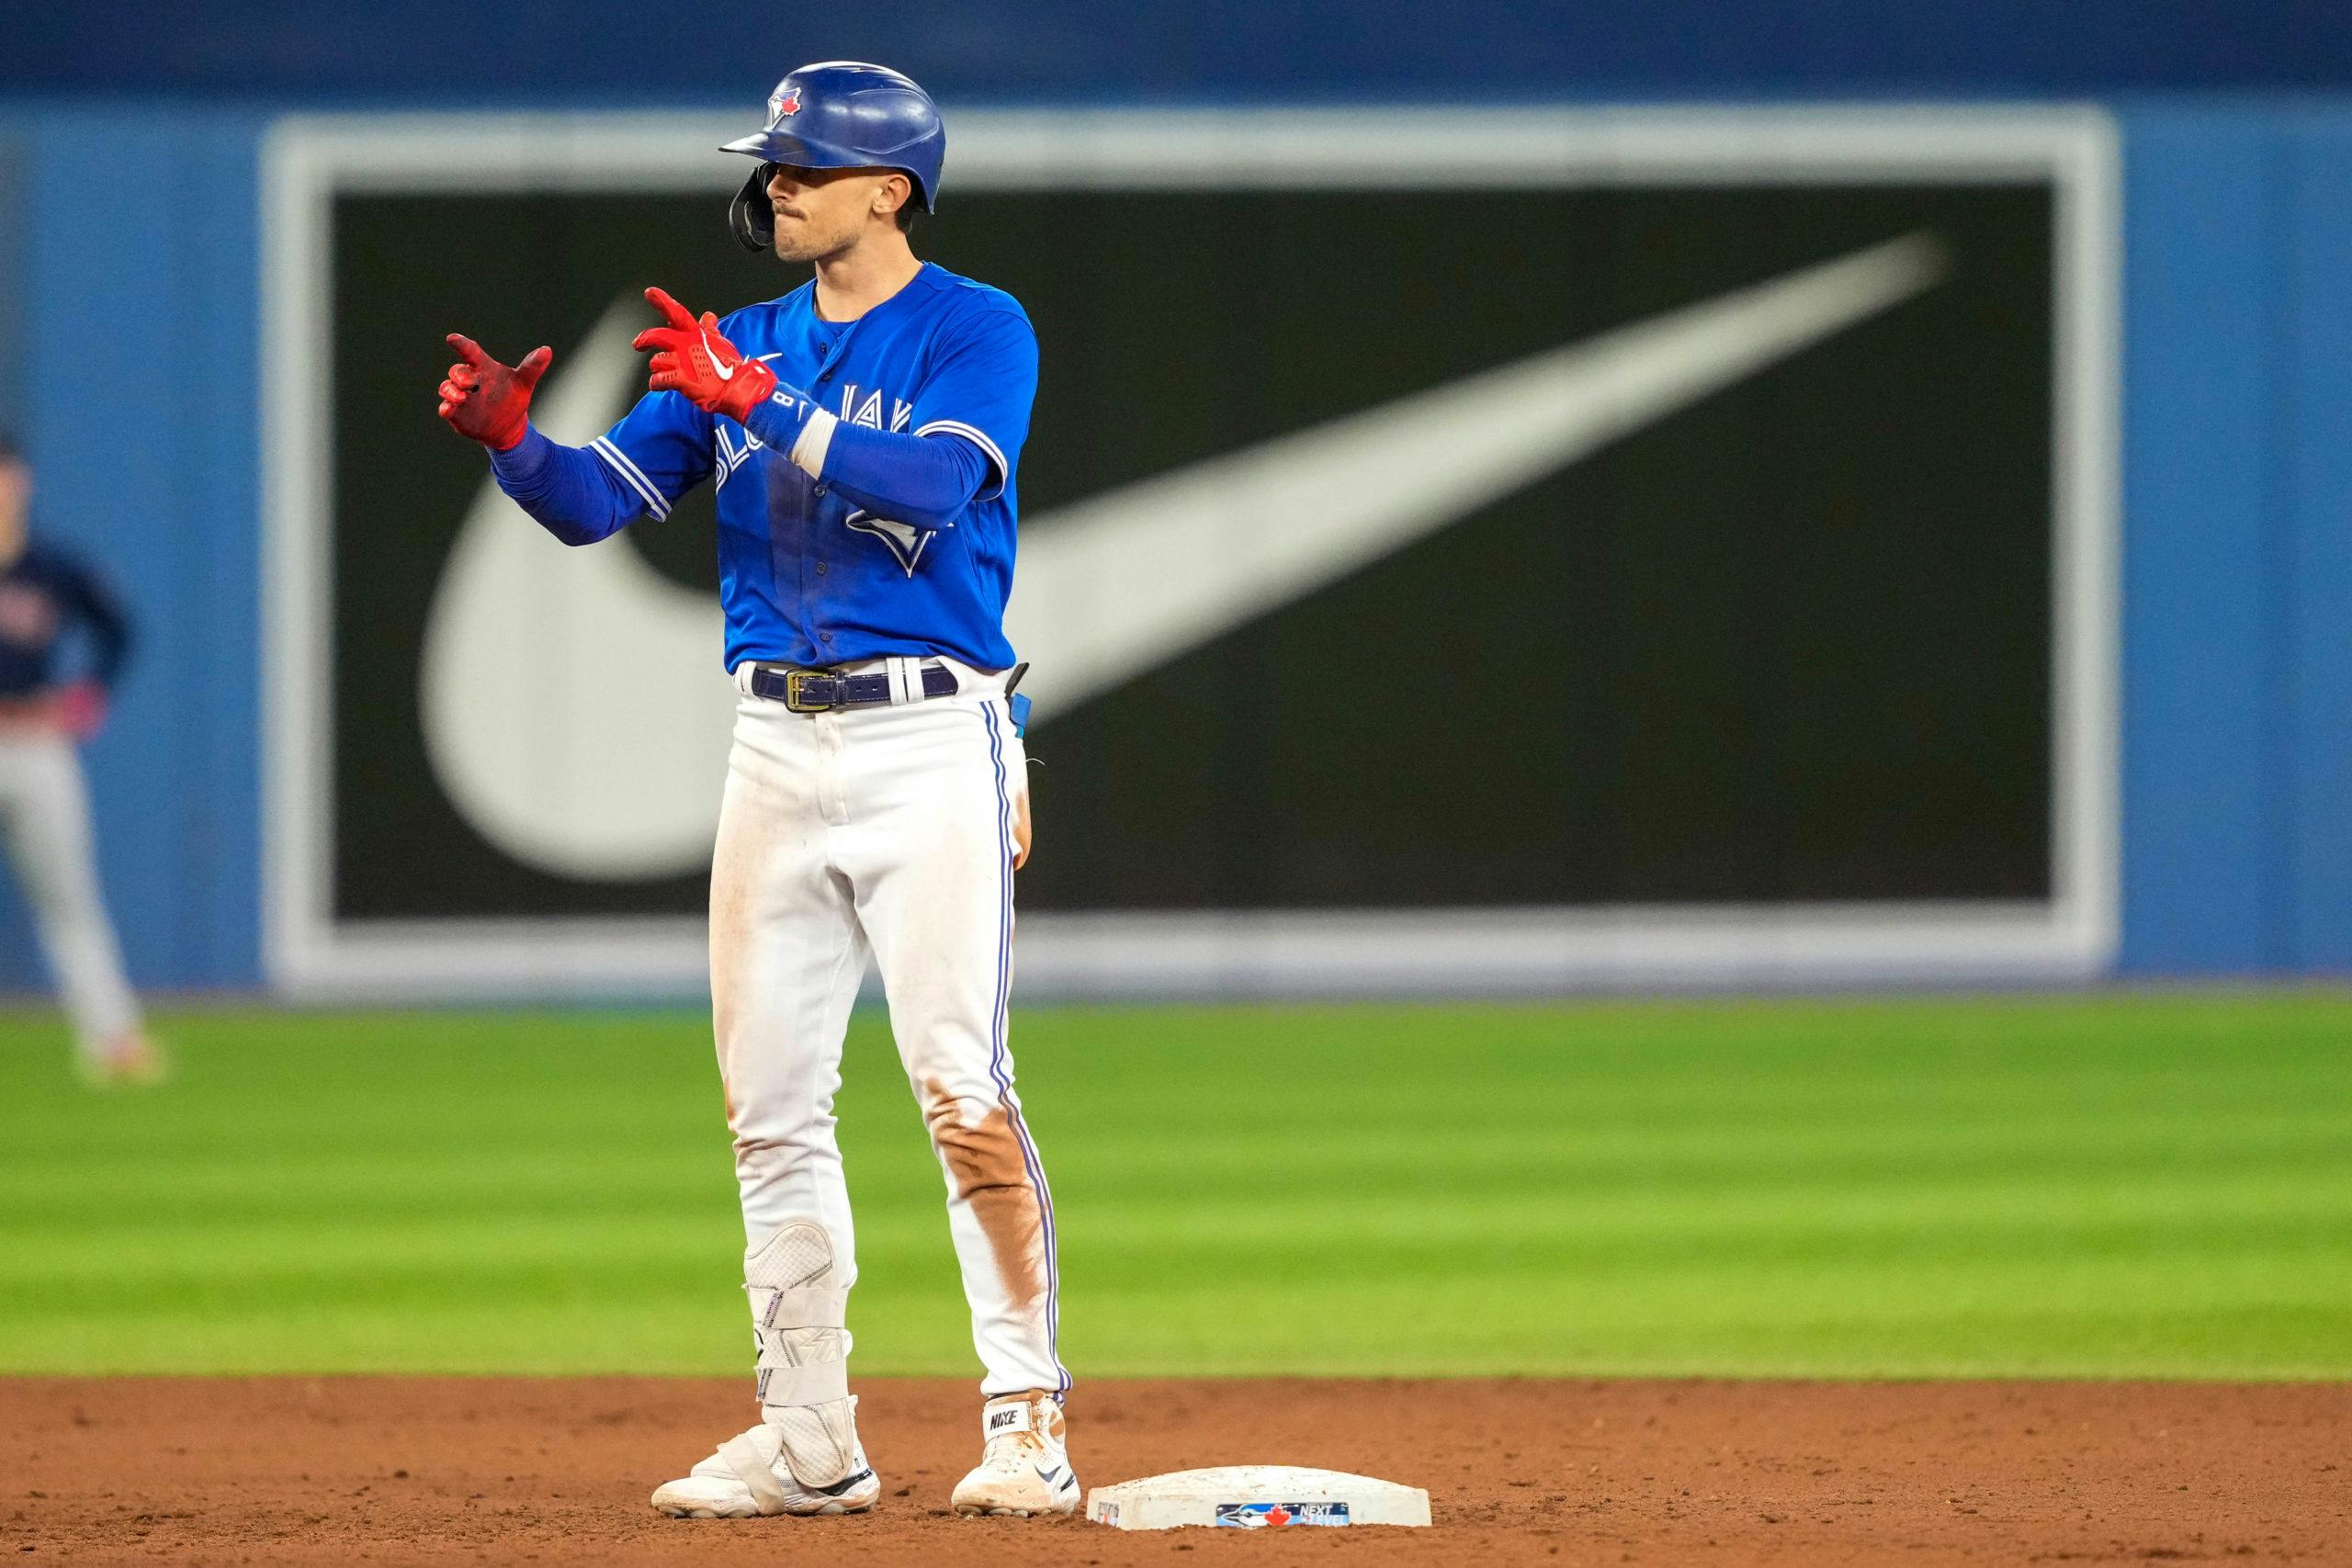 Cavan Biggio continues to quietly impress and produce for the team